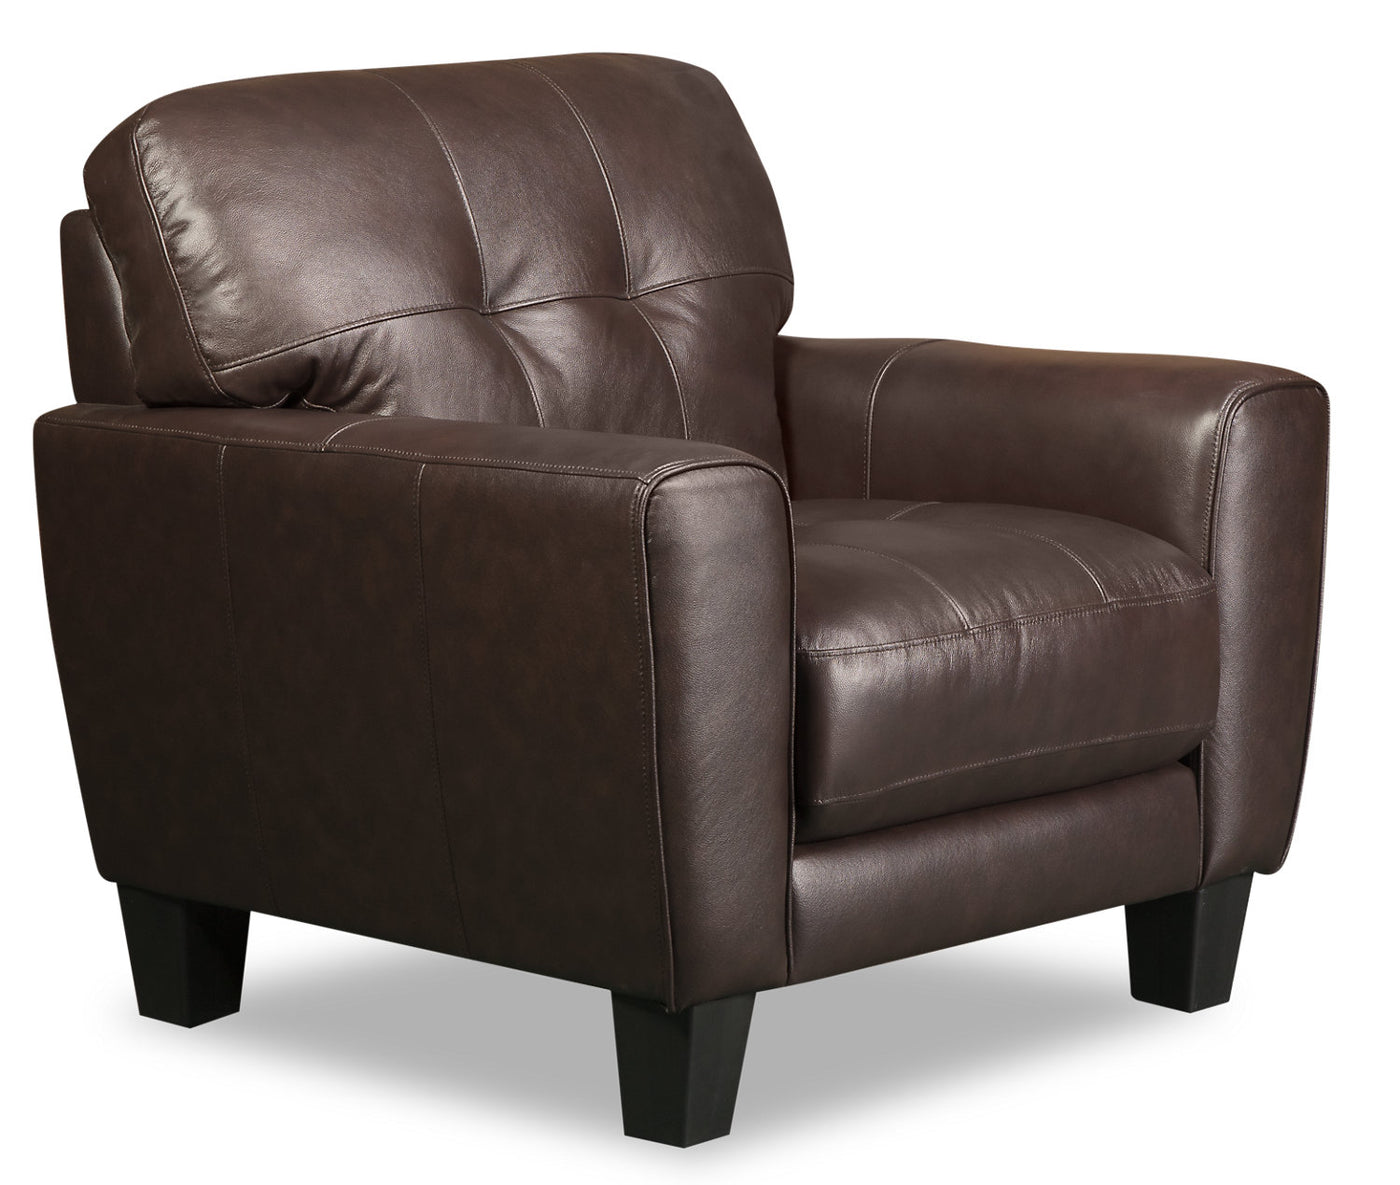 Curt Genuine Leather Chair Brown The Brick